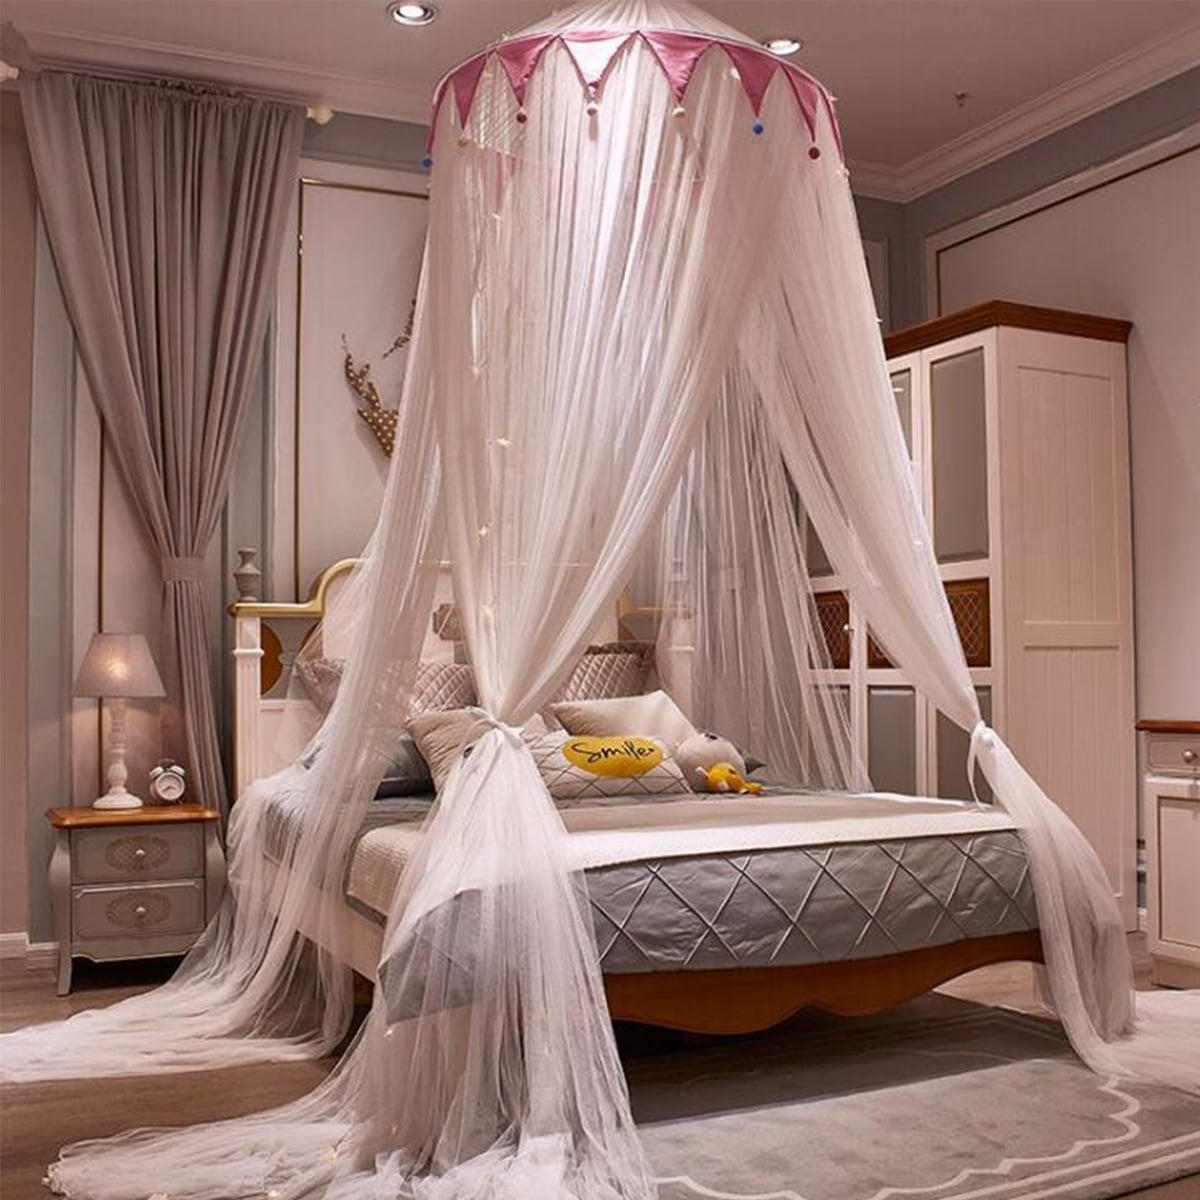 Details about  / Mengersi Bed Canopy Mosquito Net Princess Elegant Lace Round Sheer Mesh Bed Cu